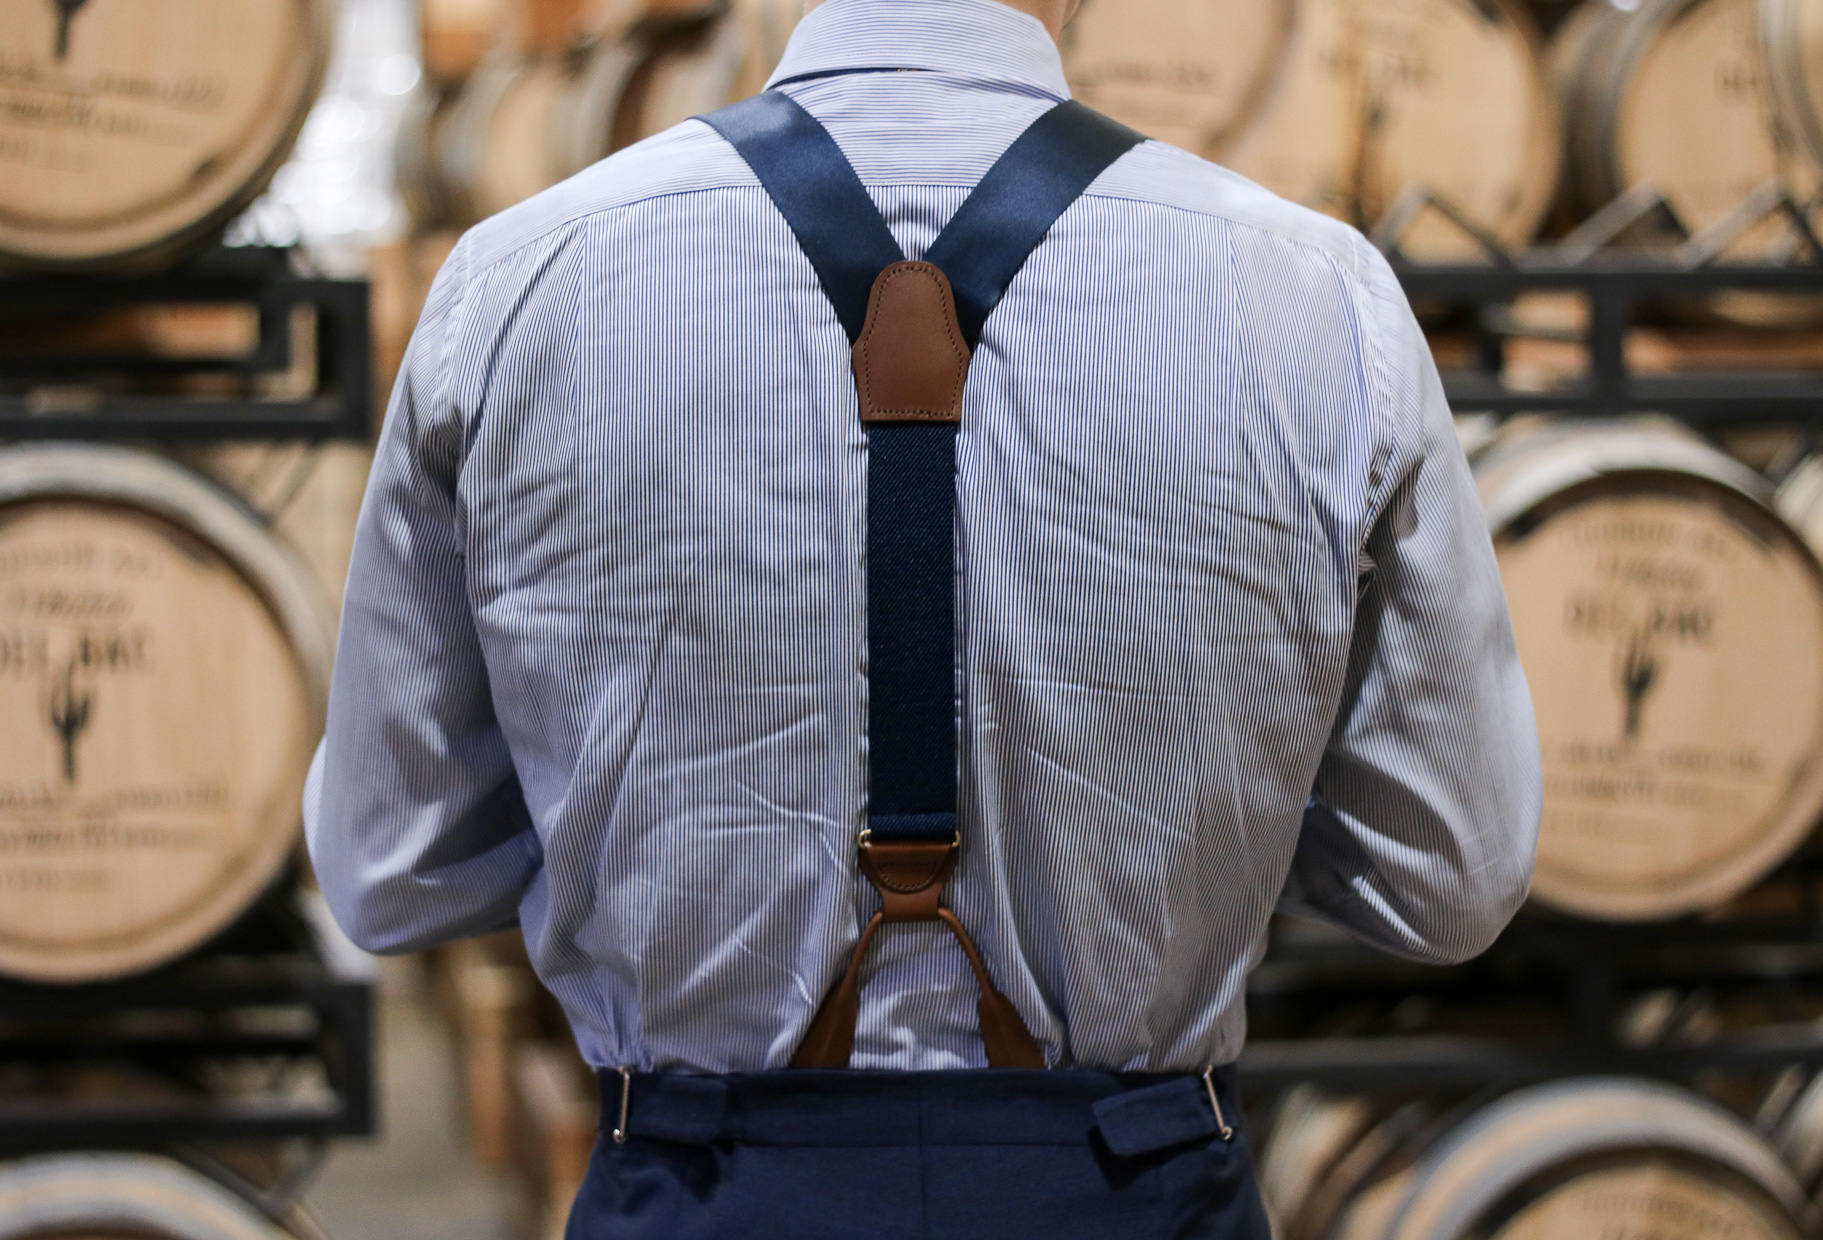 How To Keep Suspenders From Slipping